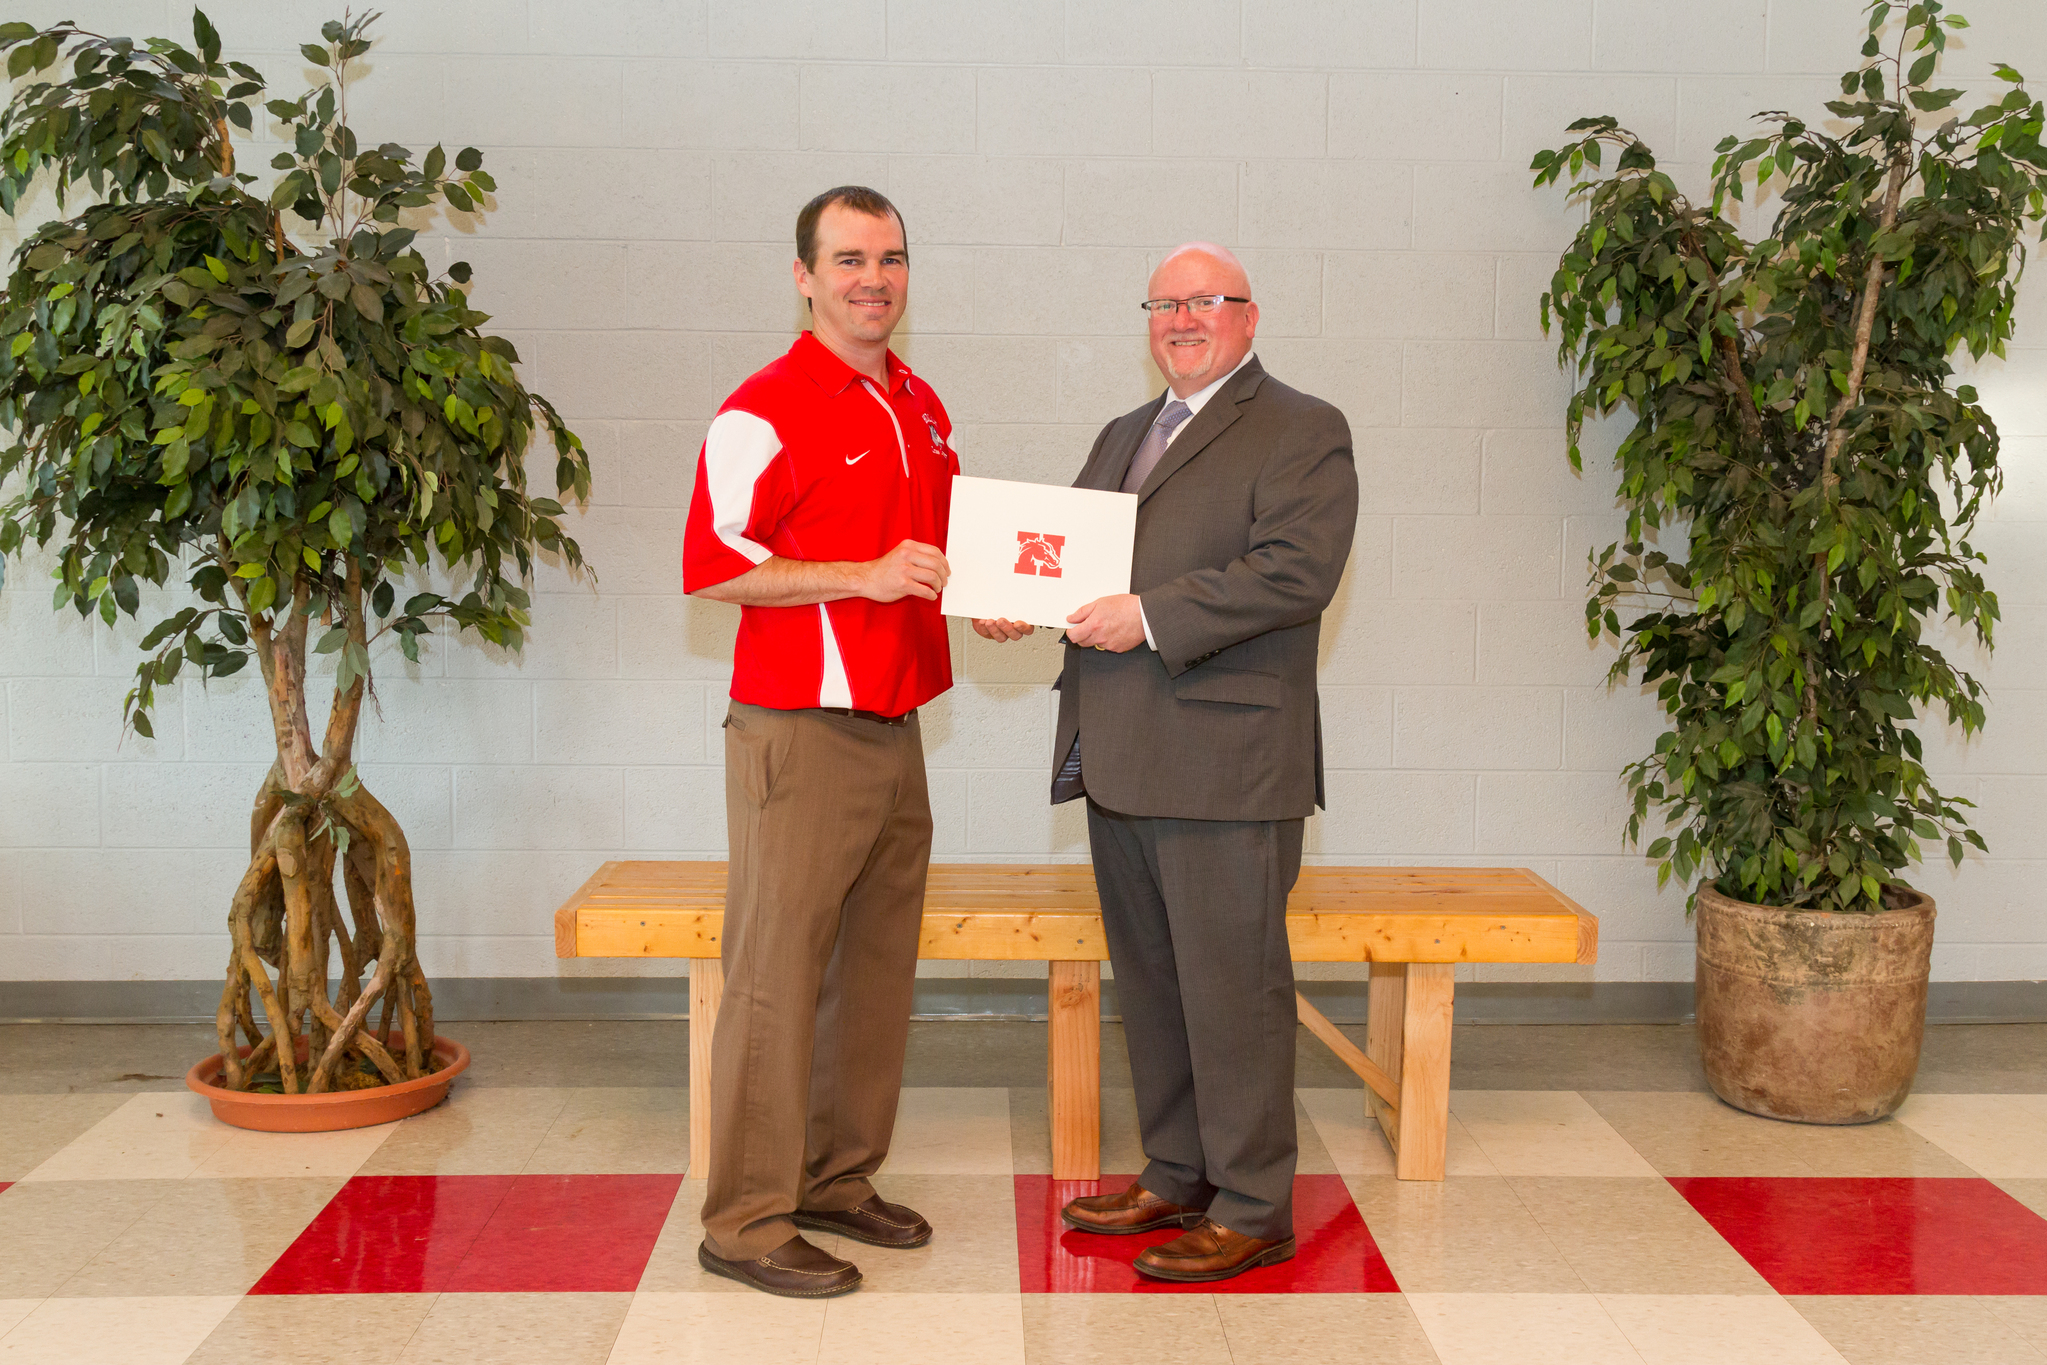 Mr. Brinker and the Board President holding award